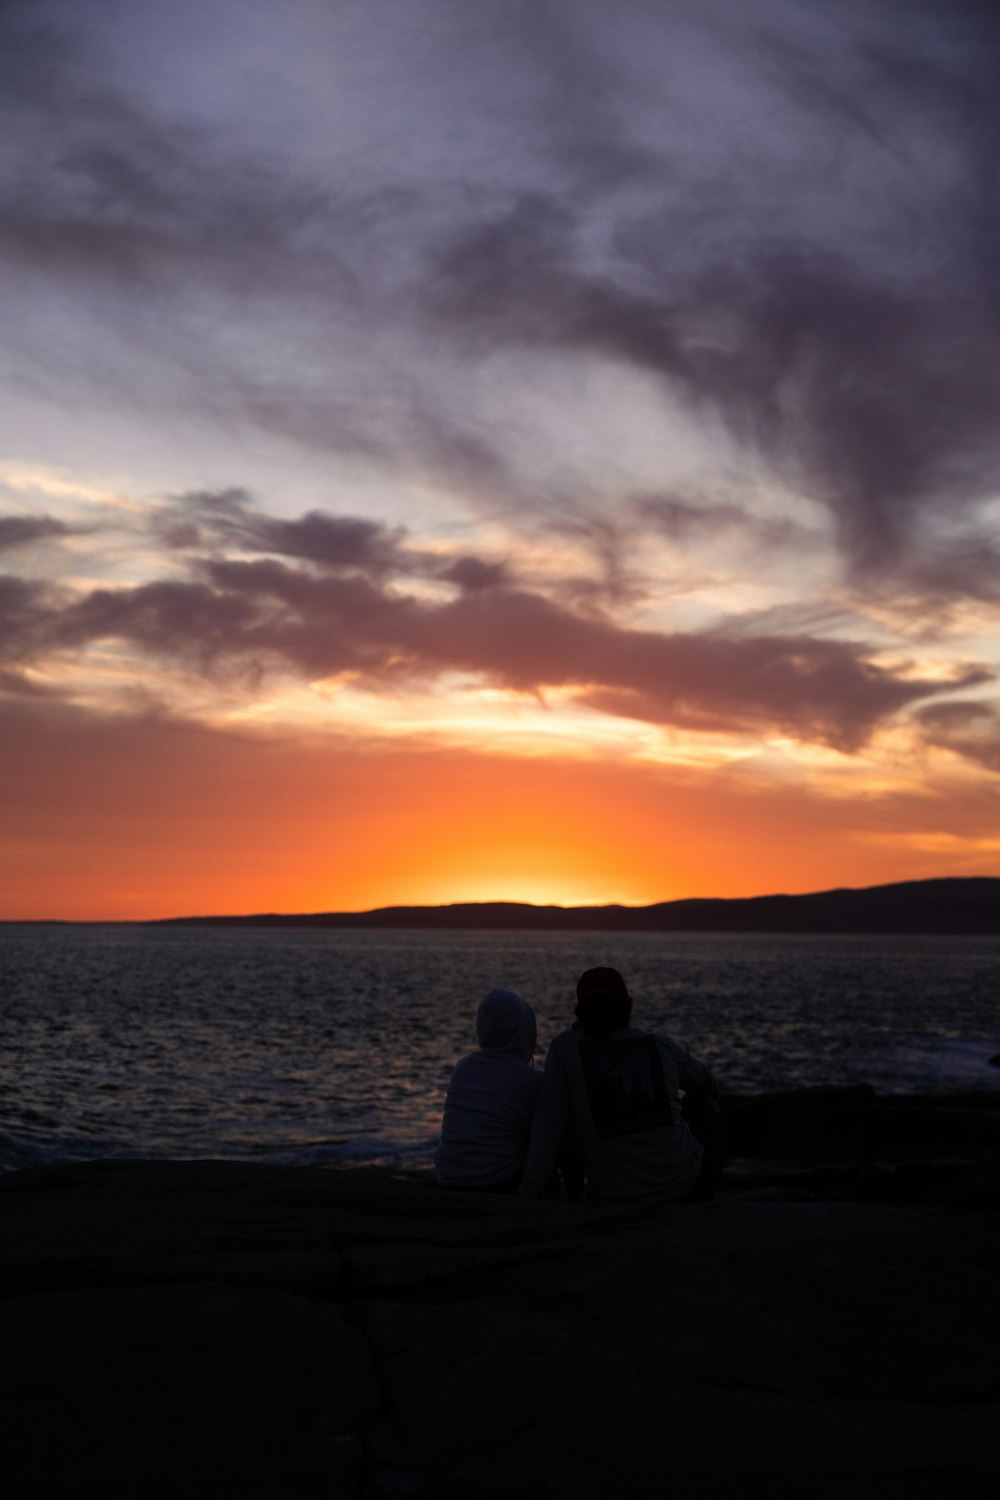 two people sitting on a bench watching the sunset